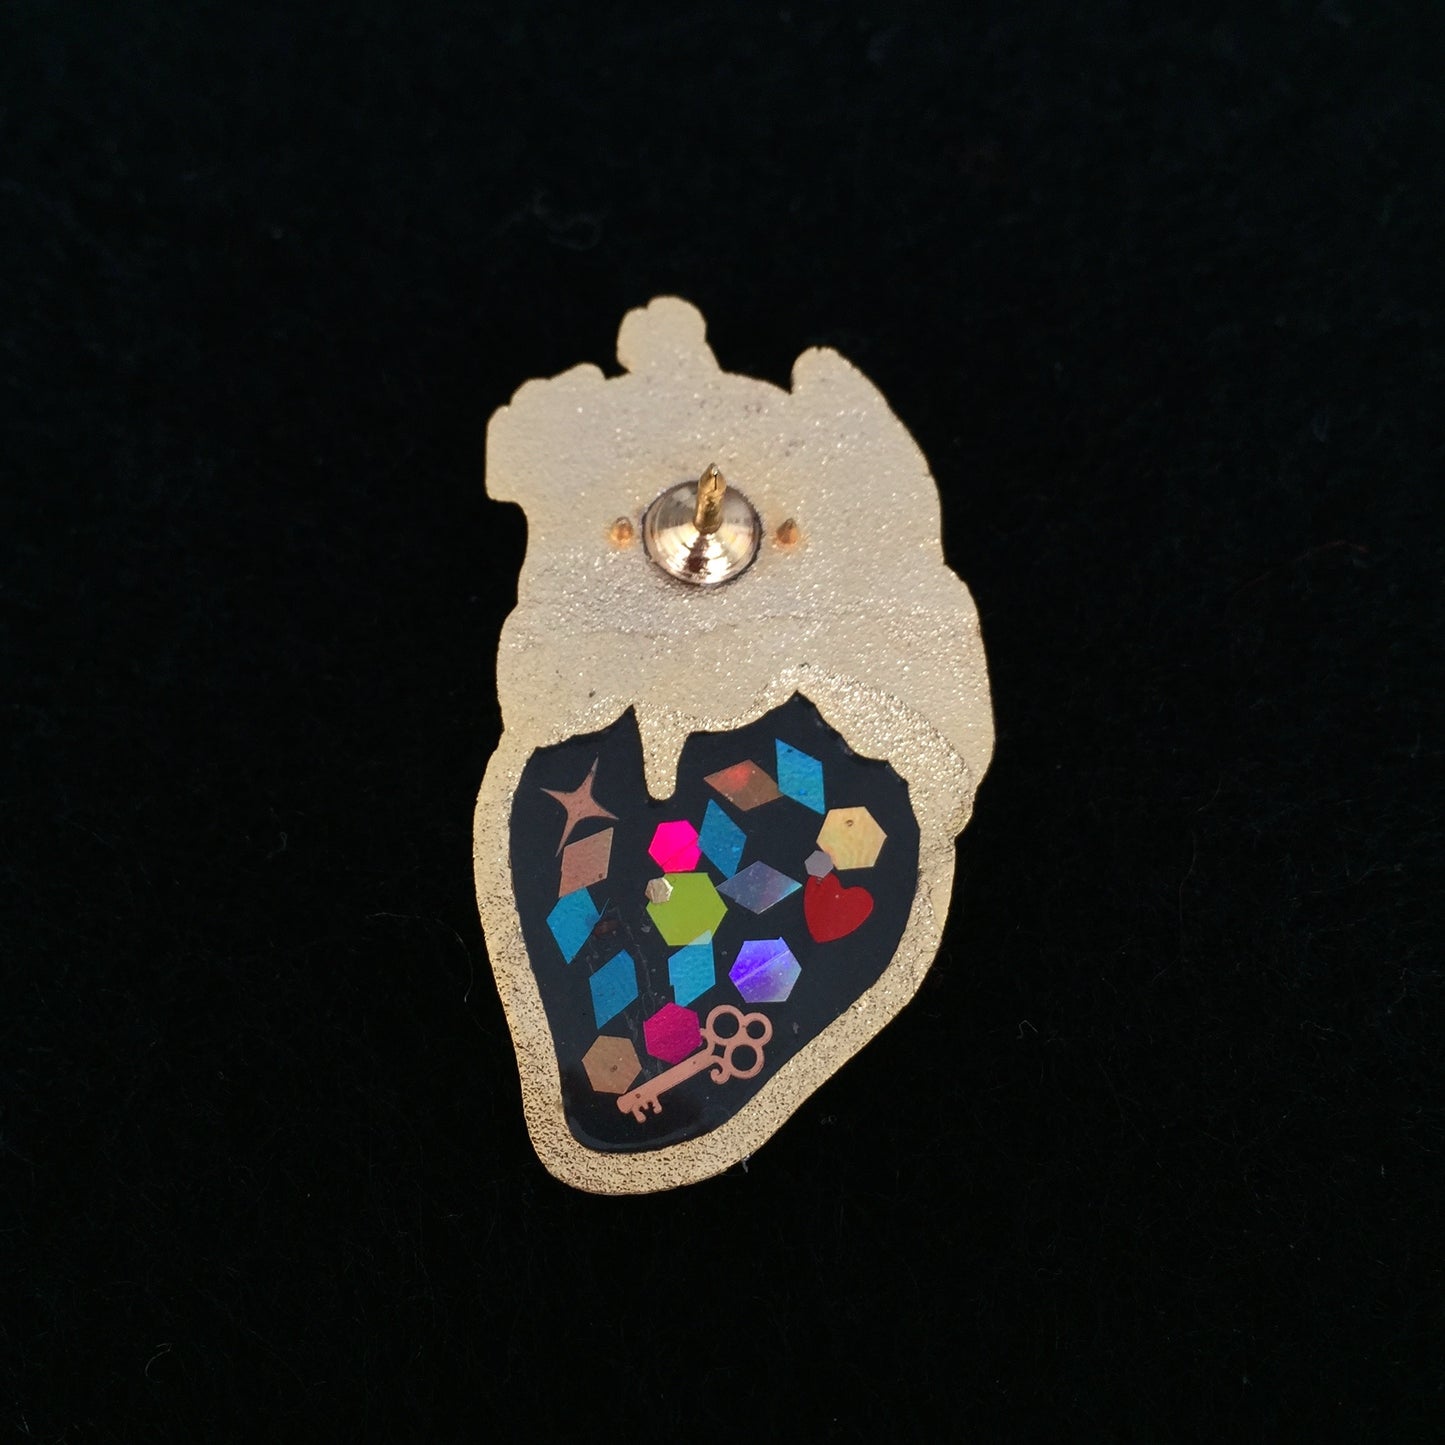 Transparent Heart Pin - Love Is The Key